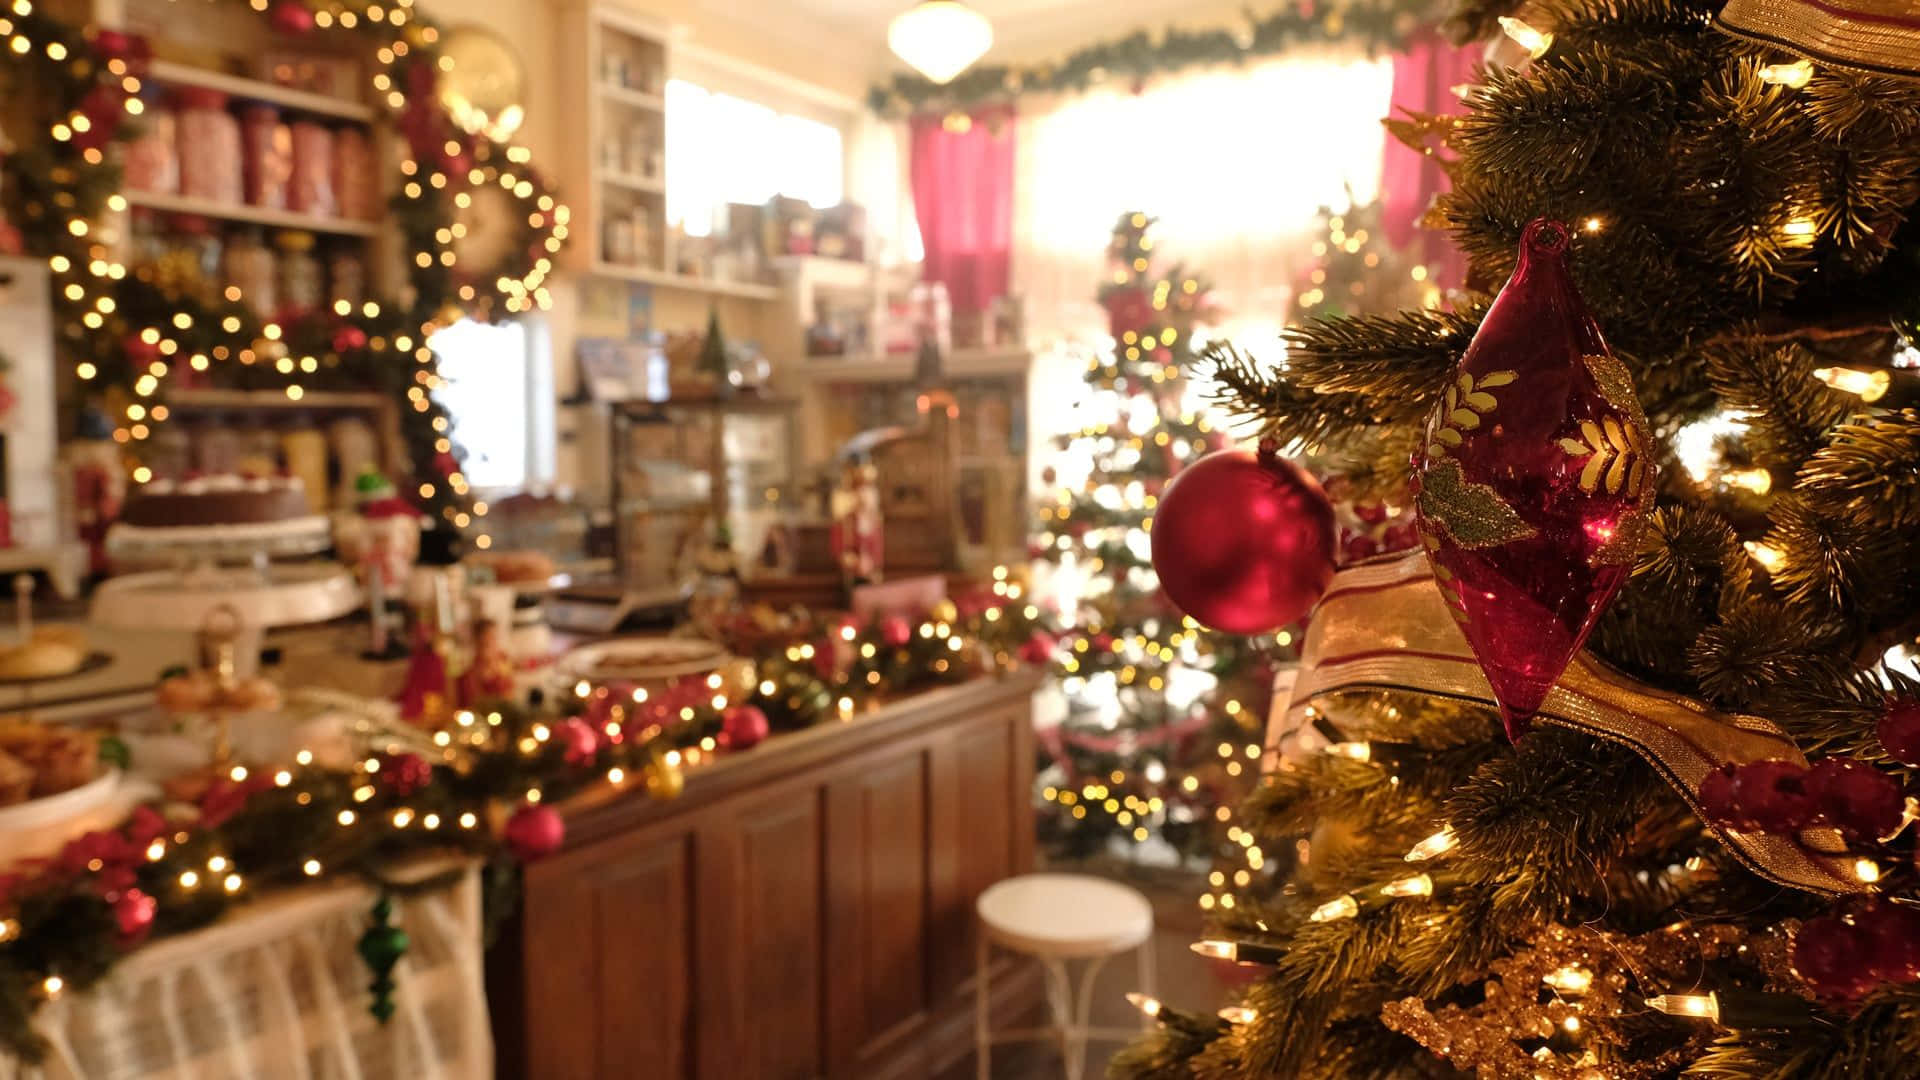 A Christmas Tree In A Shop With Decorations